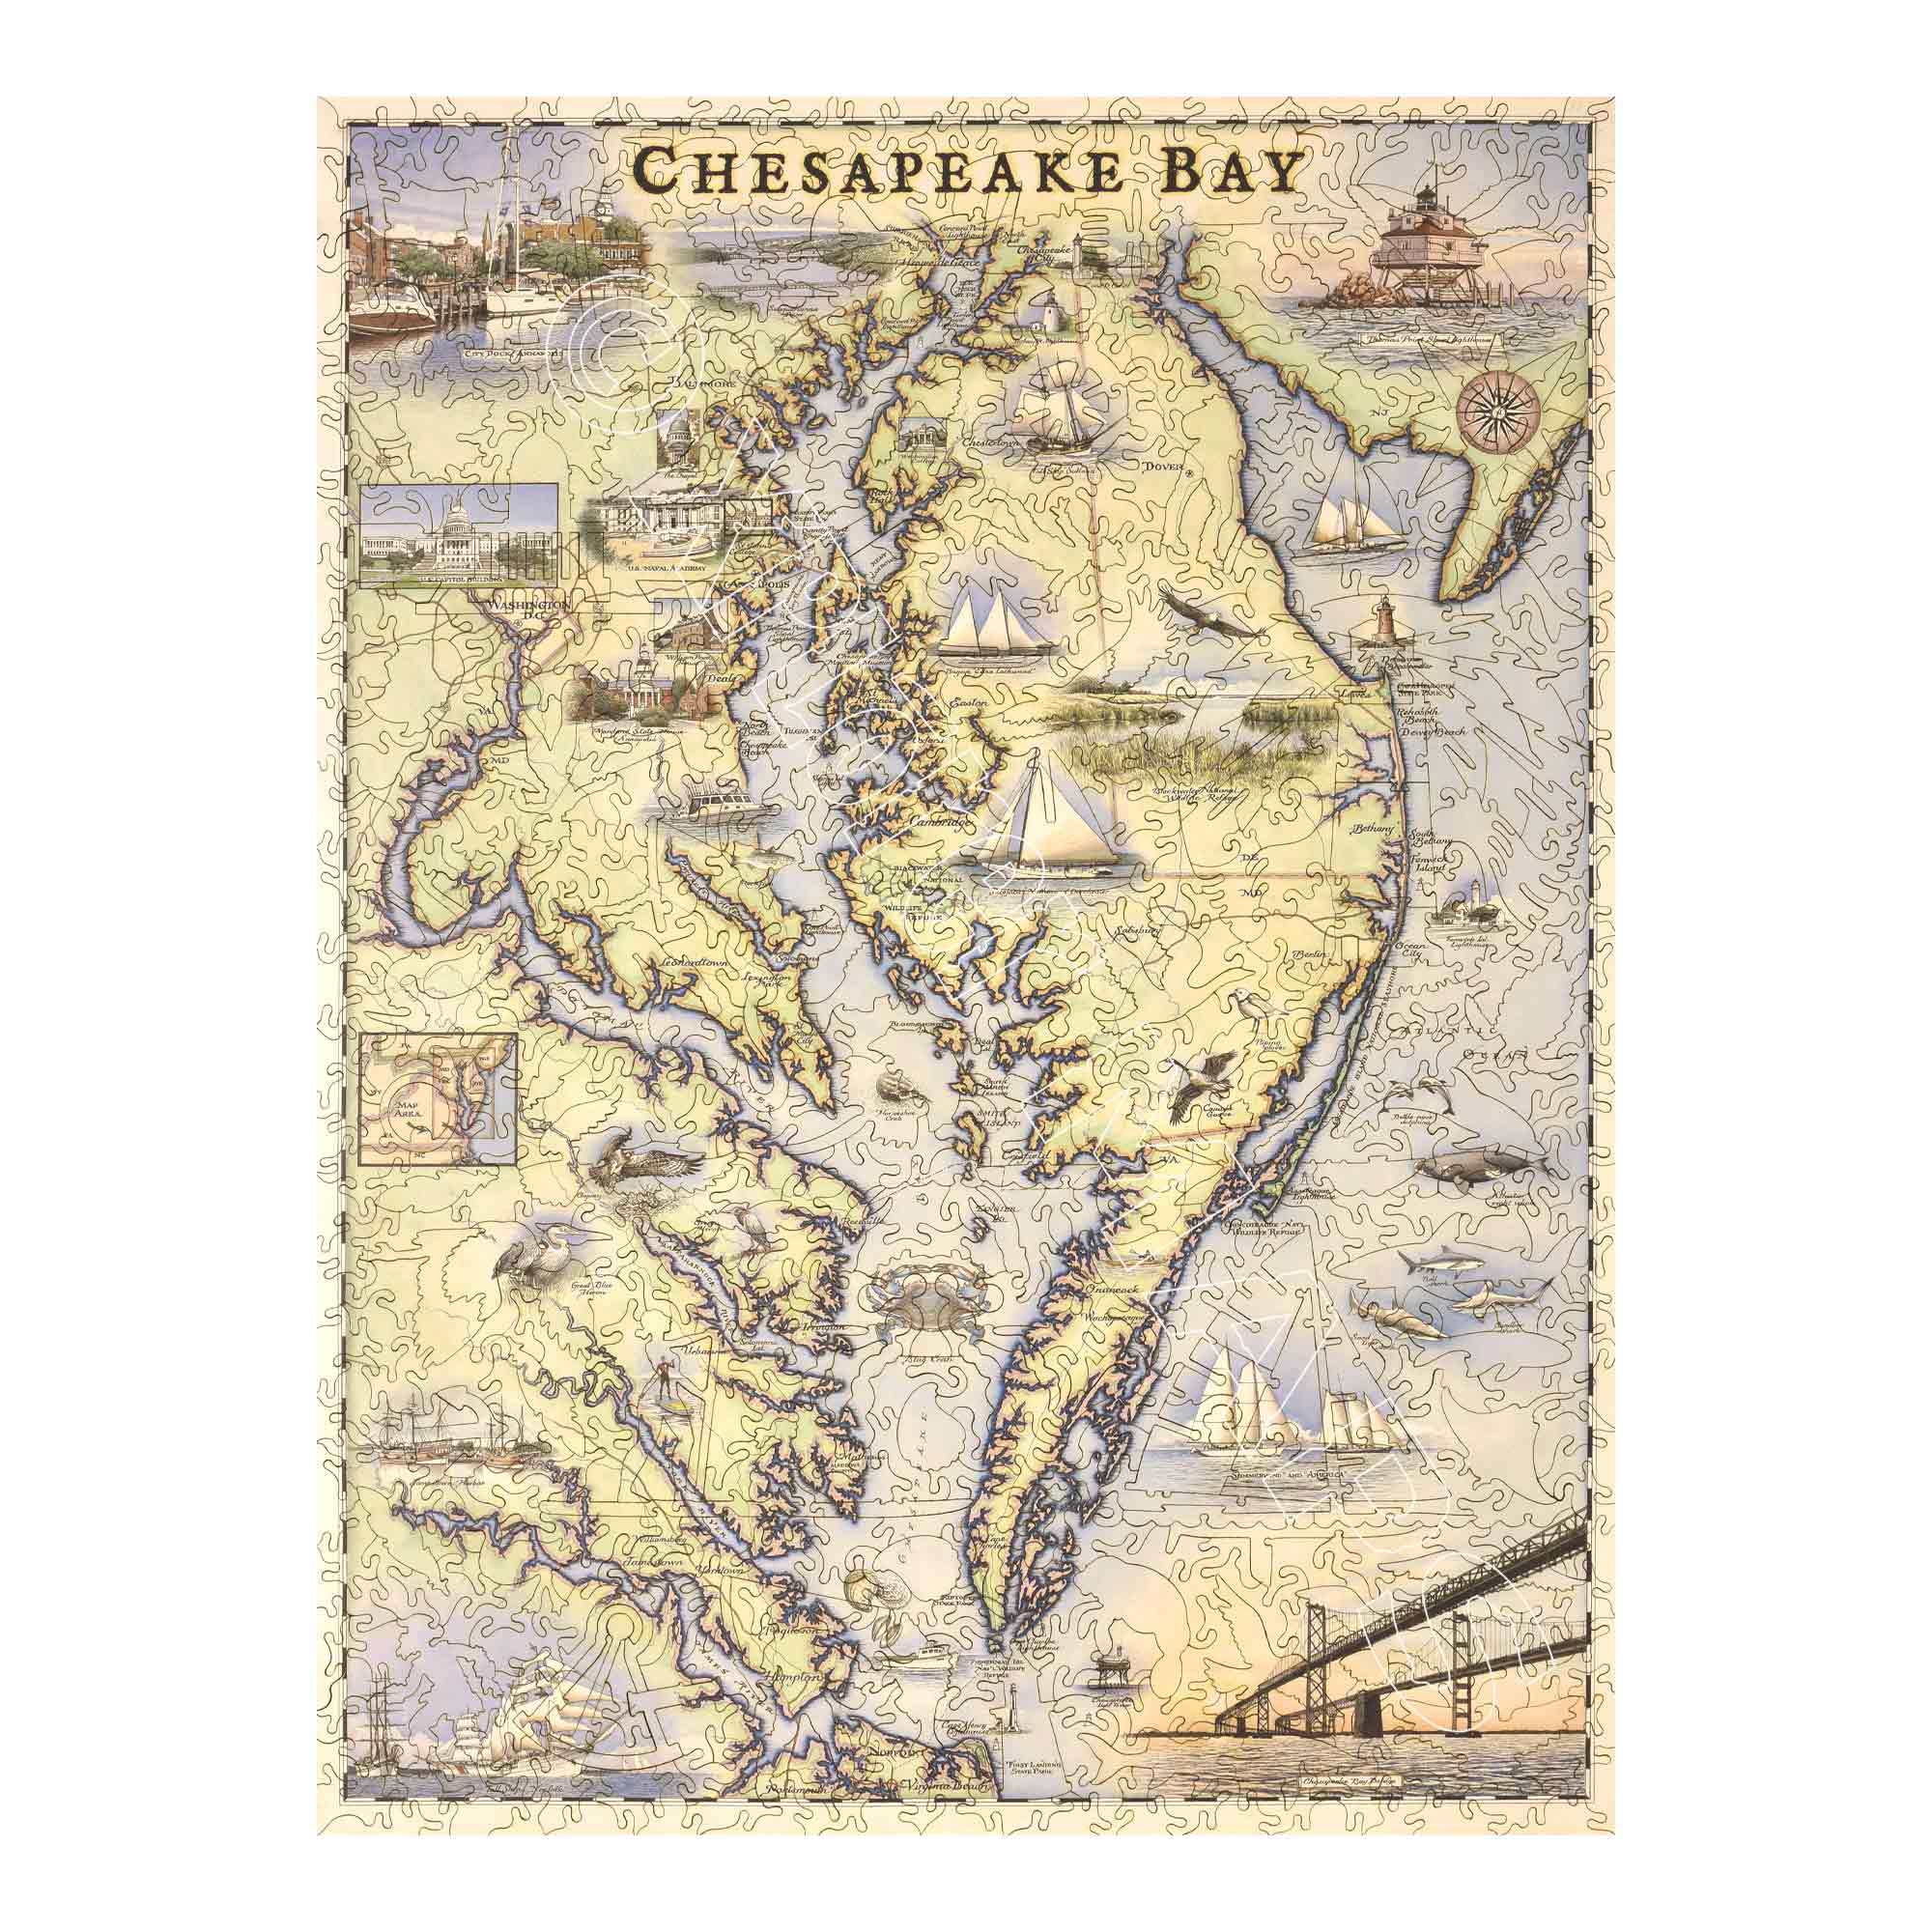 Xplorer Maps' classic wooden jigsaw puzzles. Featuring illustrations of boat craft and marine life. Places on the map include Baltimore, Annapolis, Cambridge, Yorktown, and the Chesapeake Bay Bridge. 